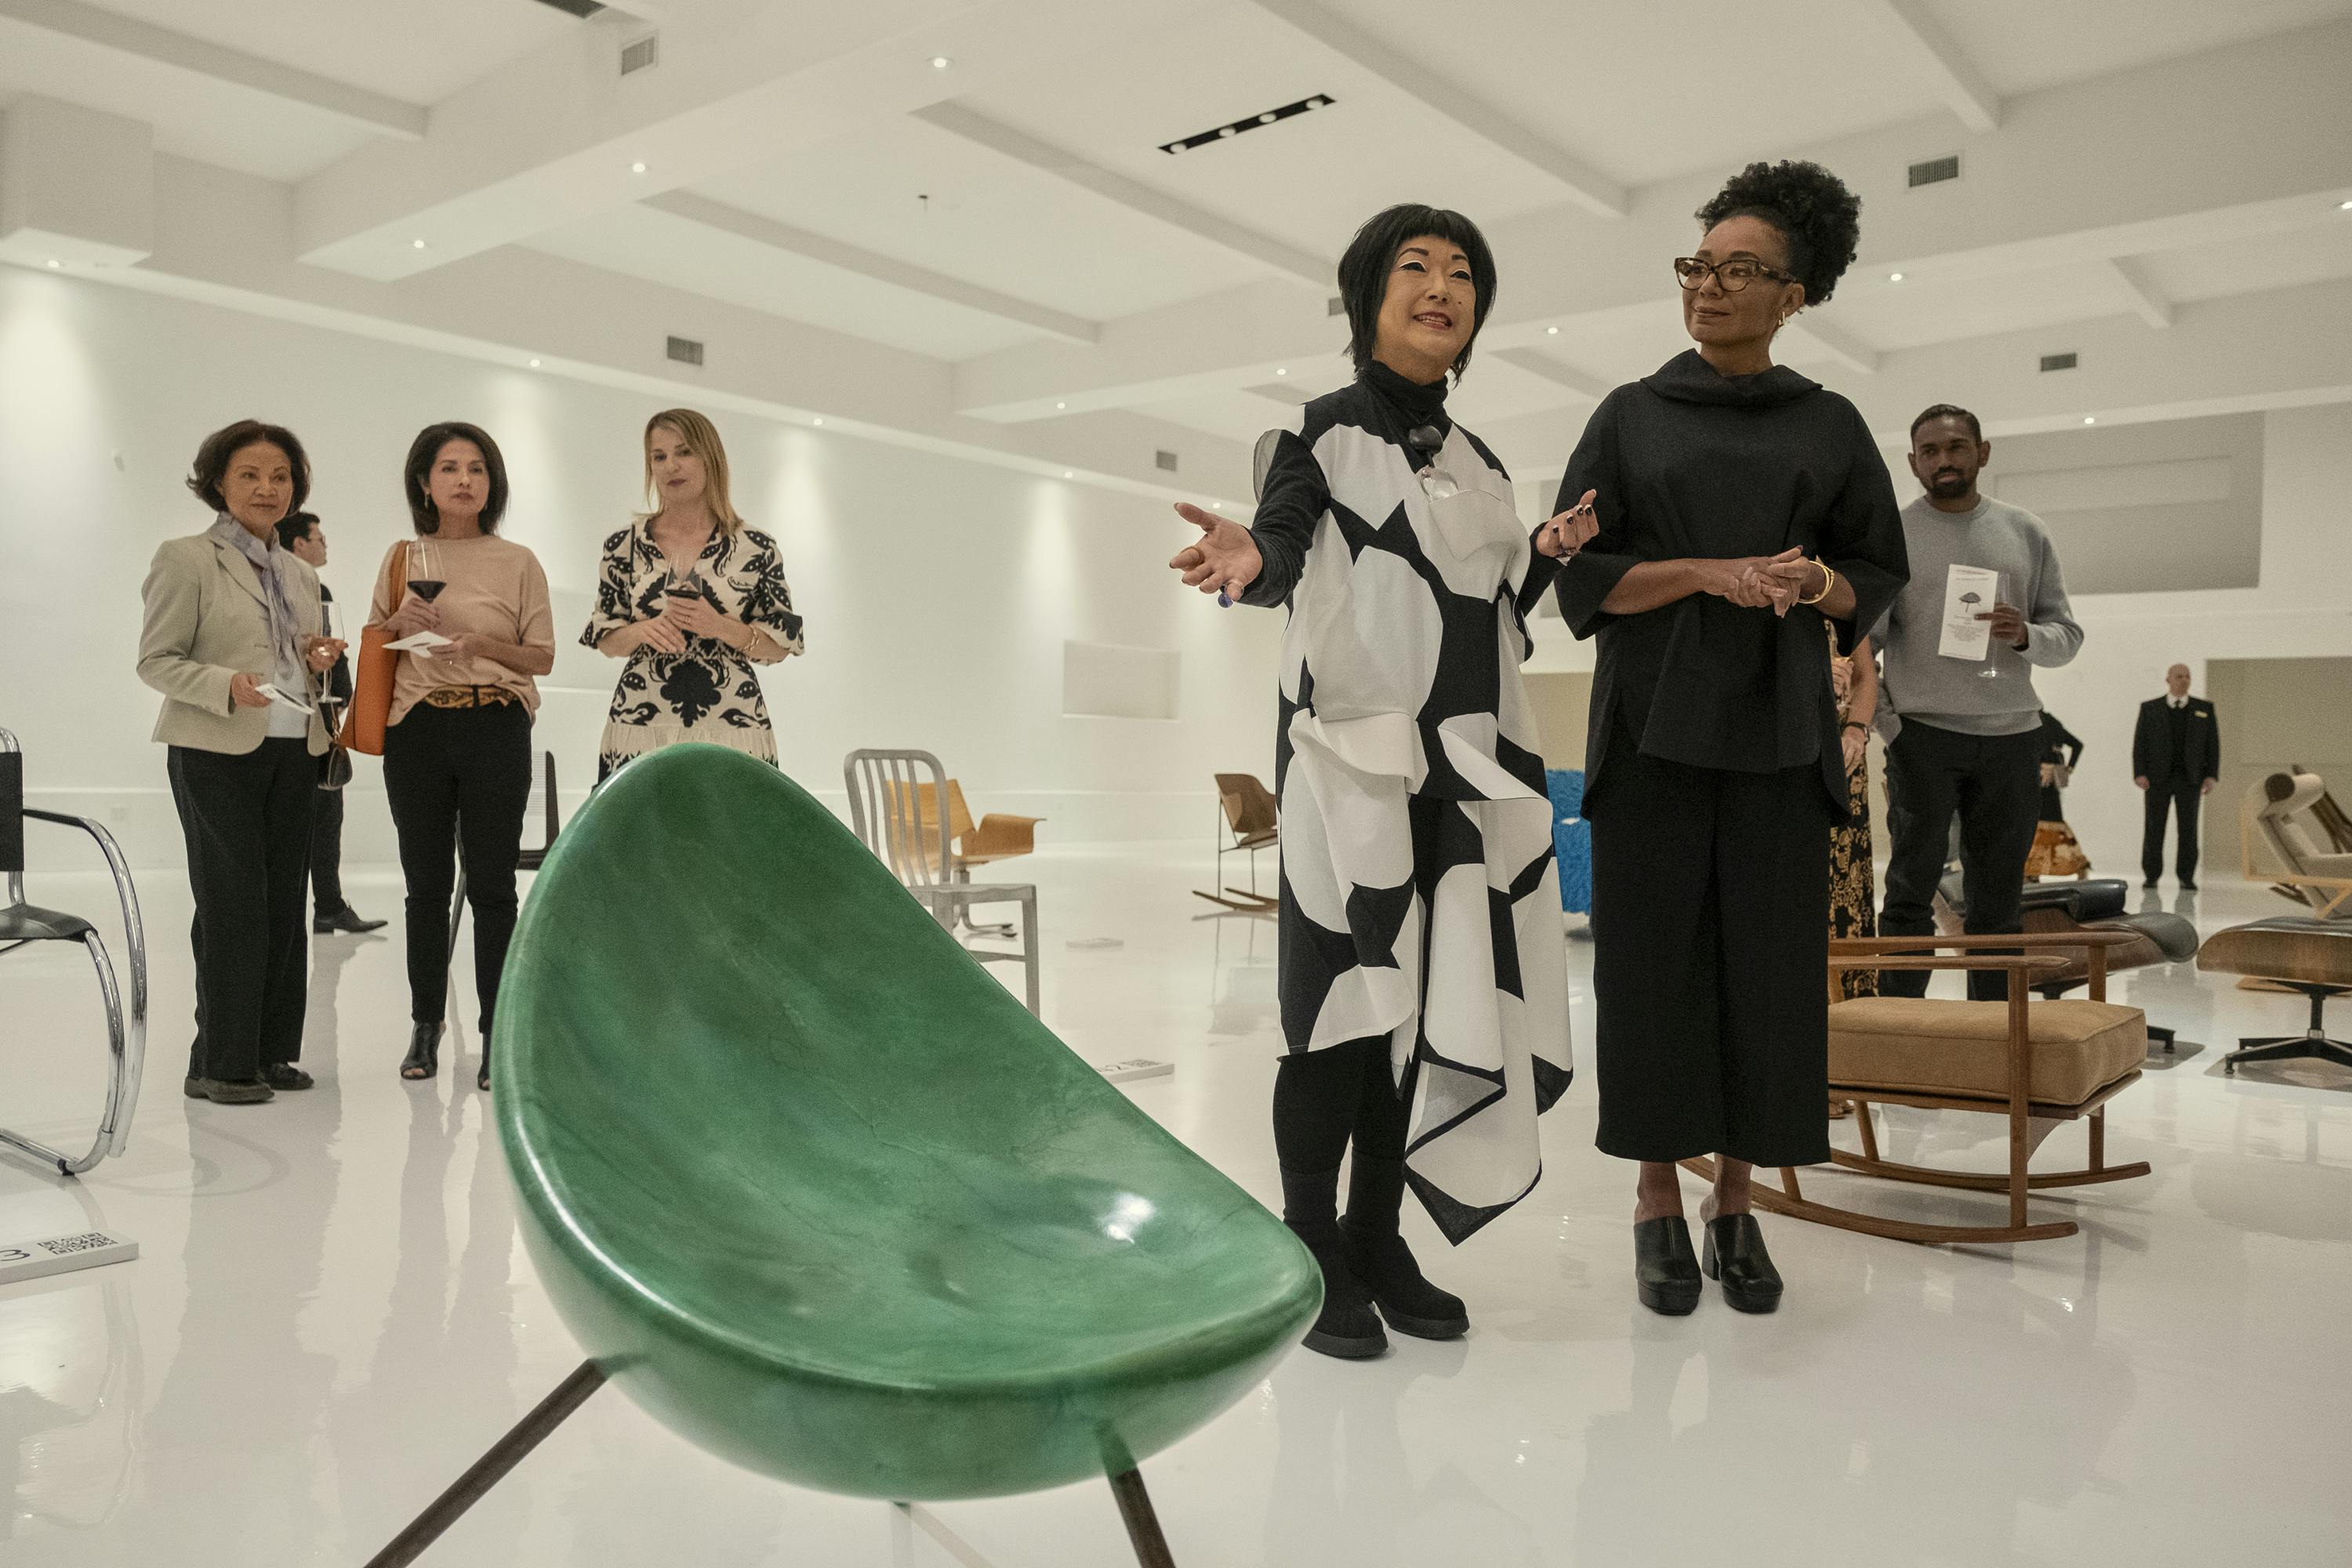 Fumi (Patti Yasutake) talks to a crowd of people about the green Tamago chair, which sits threateningly in the foreground of this shot.  